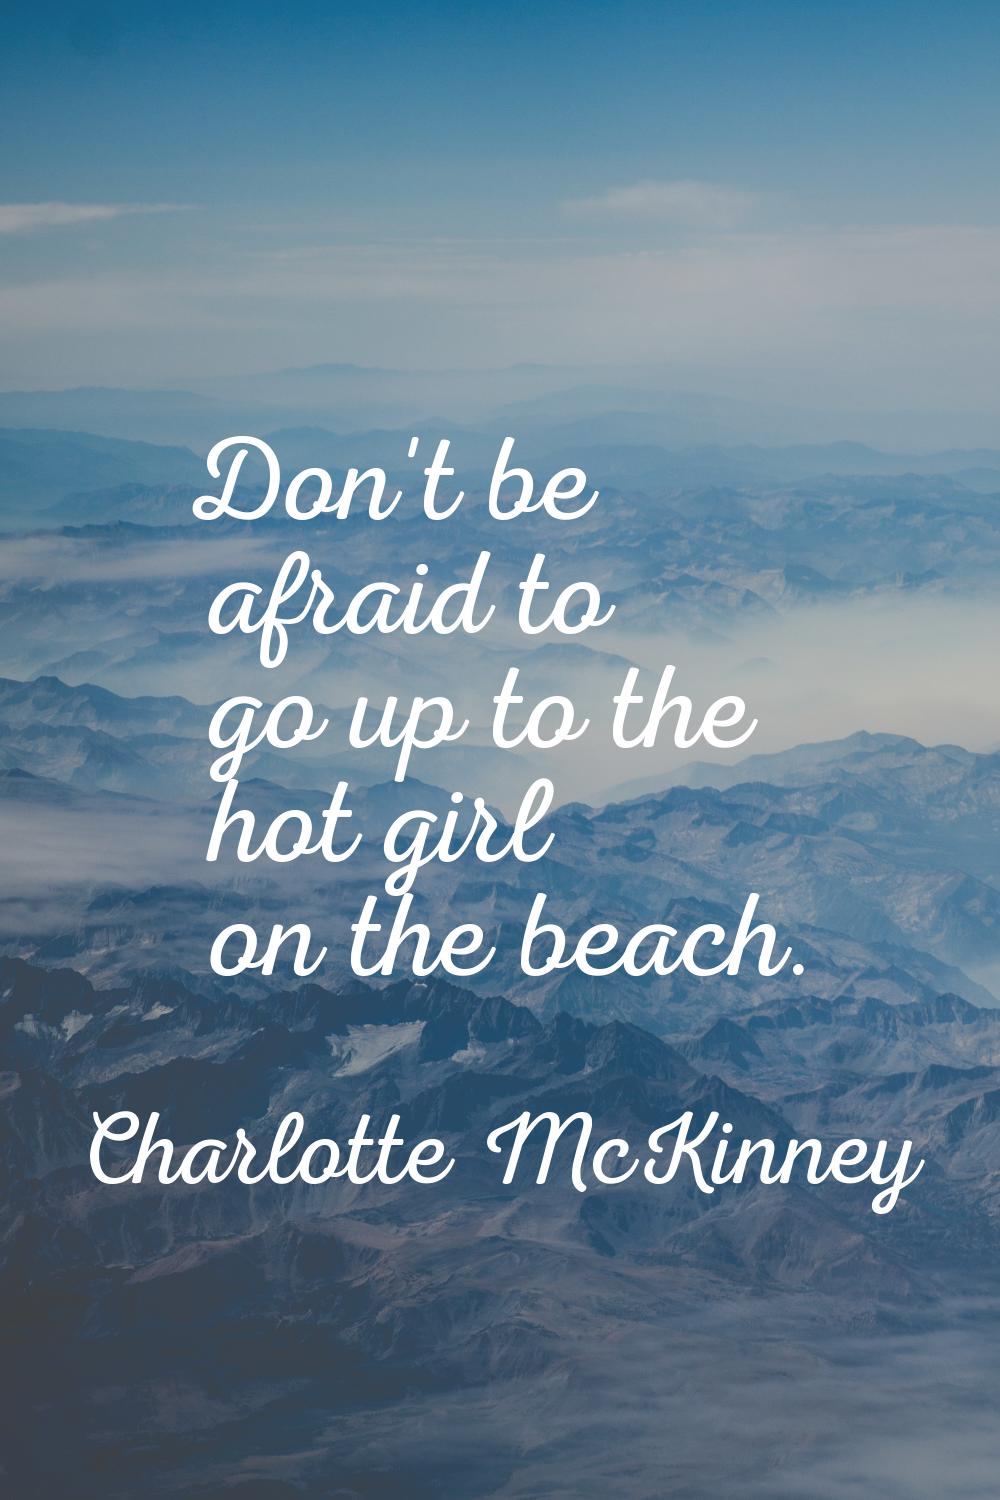 Don't be afraid to go up to the hot girl on the beach.